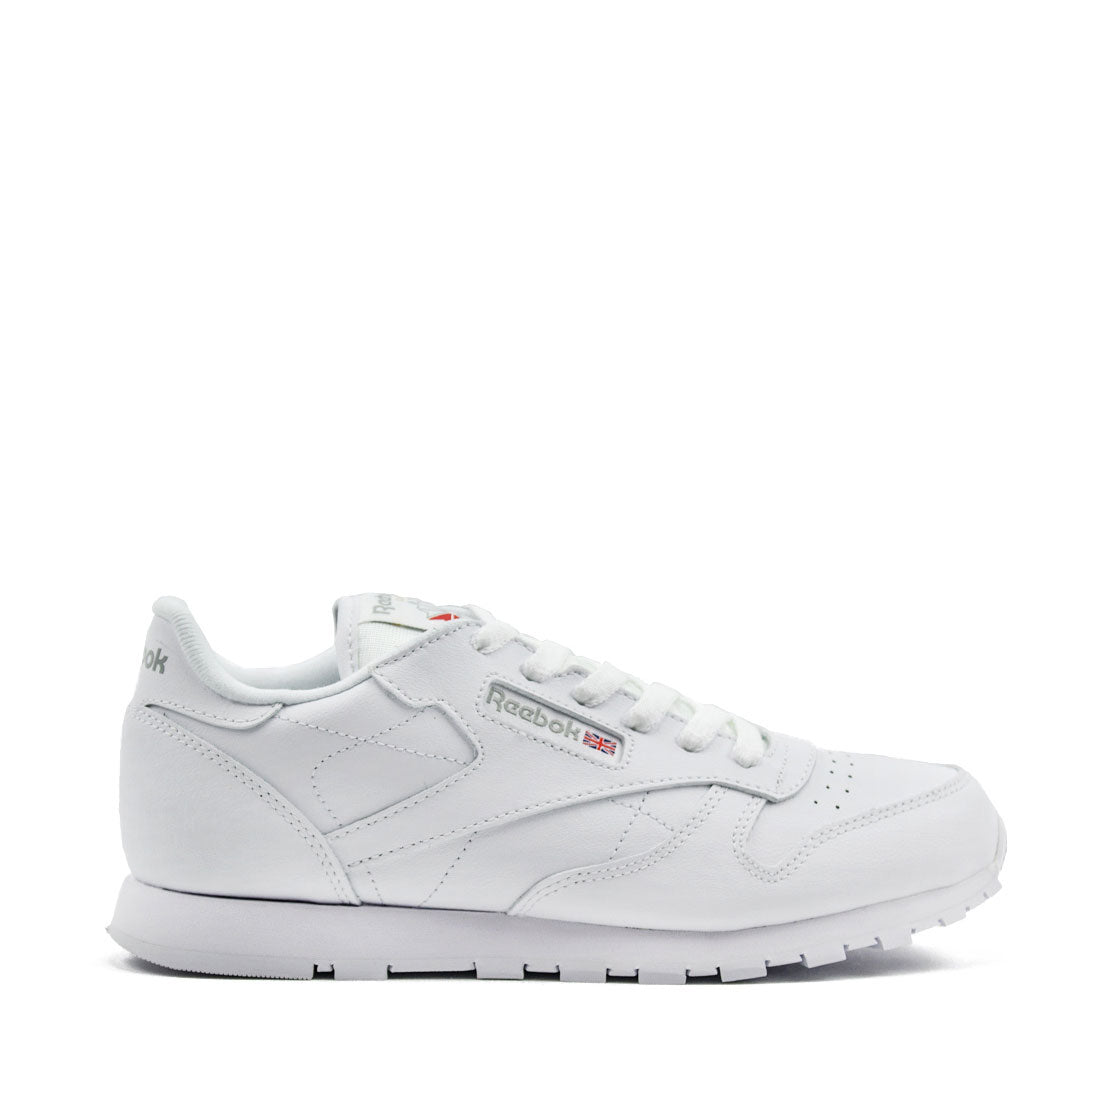 Reebok Classic Leather BR - 50151-90